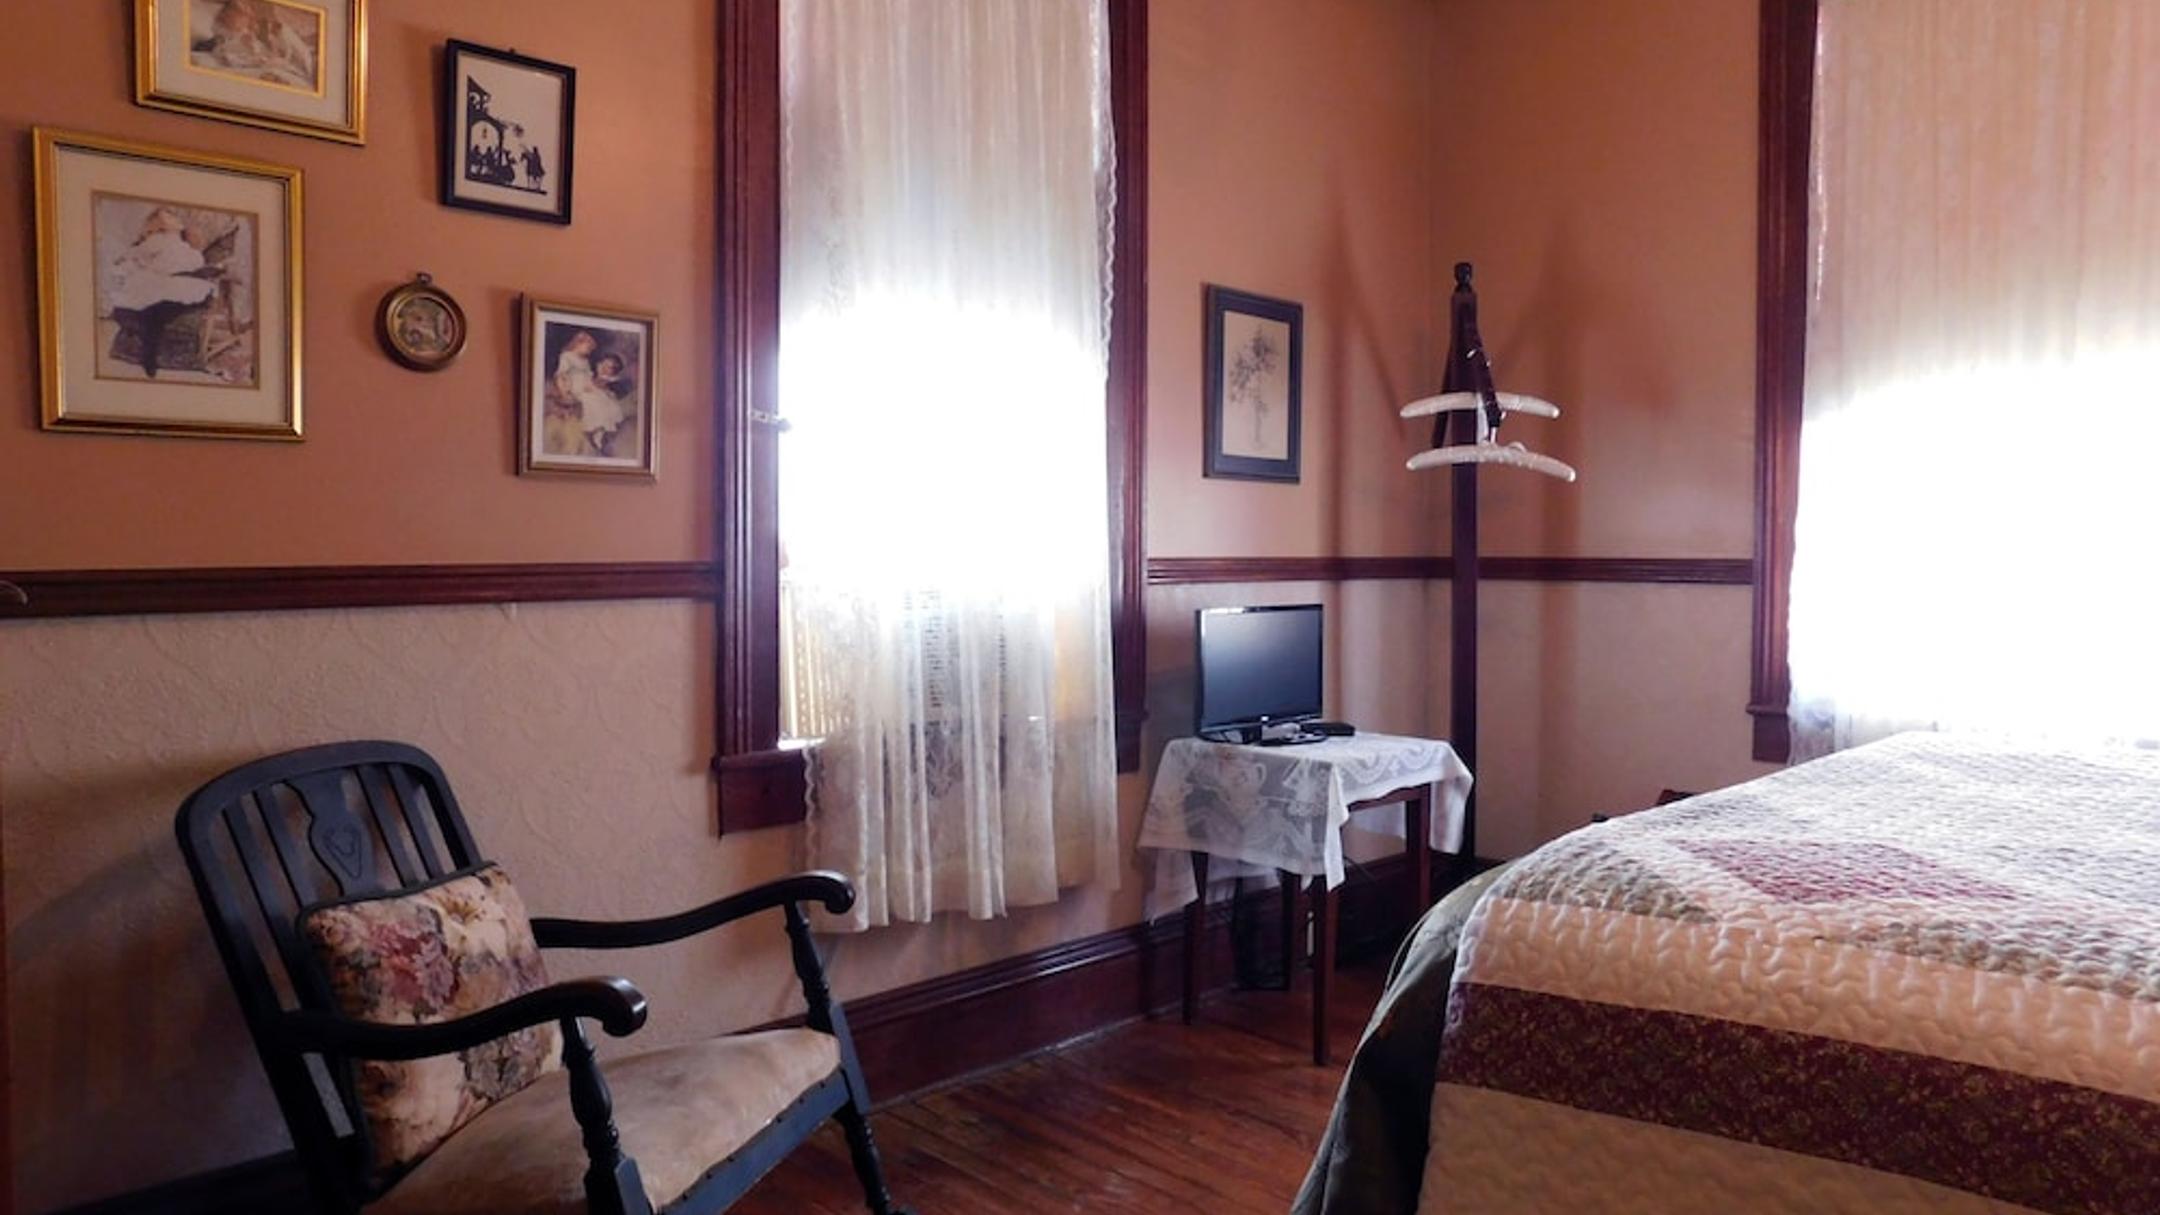 Pensacola Victorian Bed and Breakfast from $129. Pensacola Hotel Deals ...